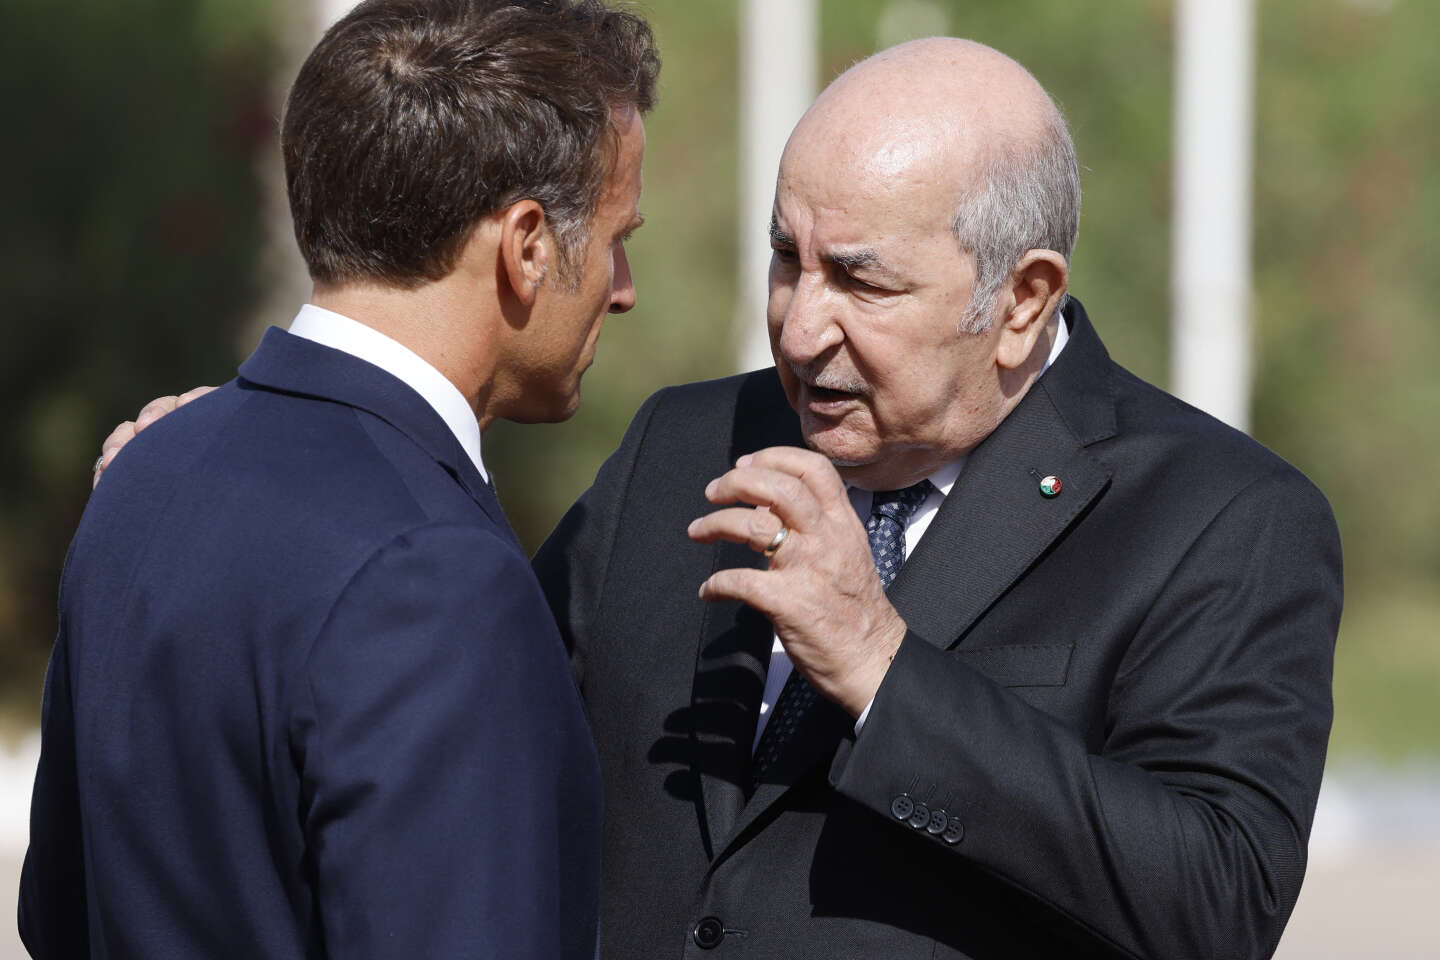 Emmanuel Macron and Abdelmadjid Tebboune announce their desire to continue to “strengthen bilateral cooperation”